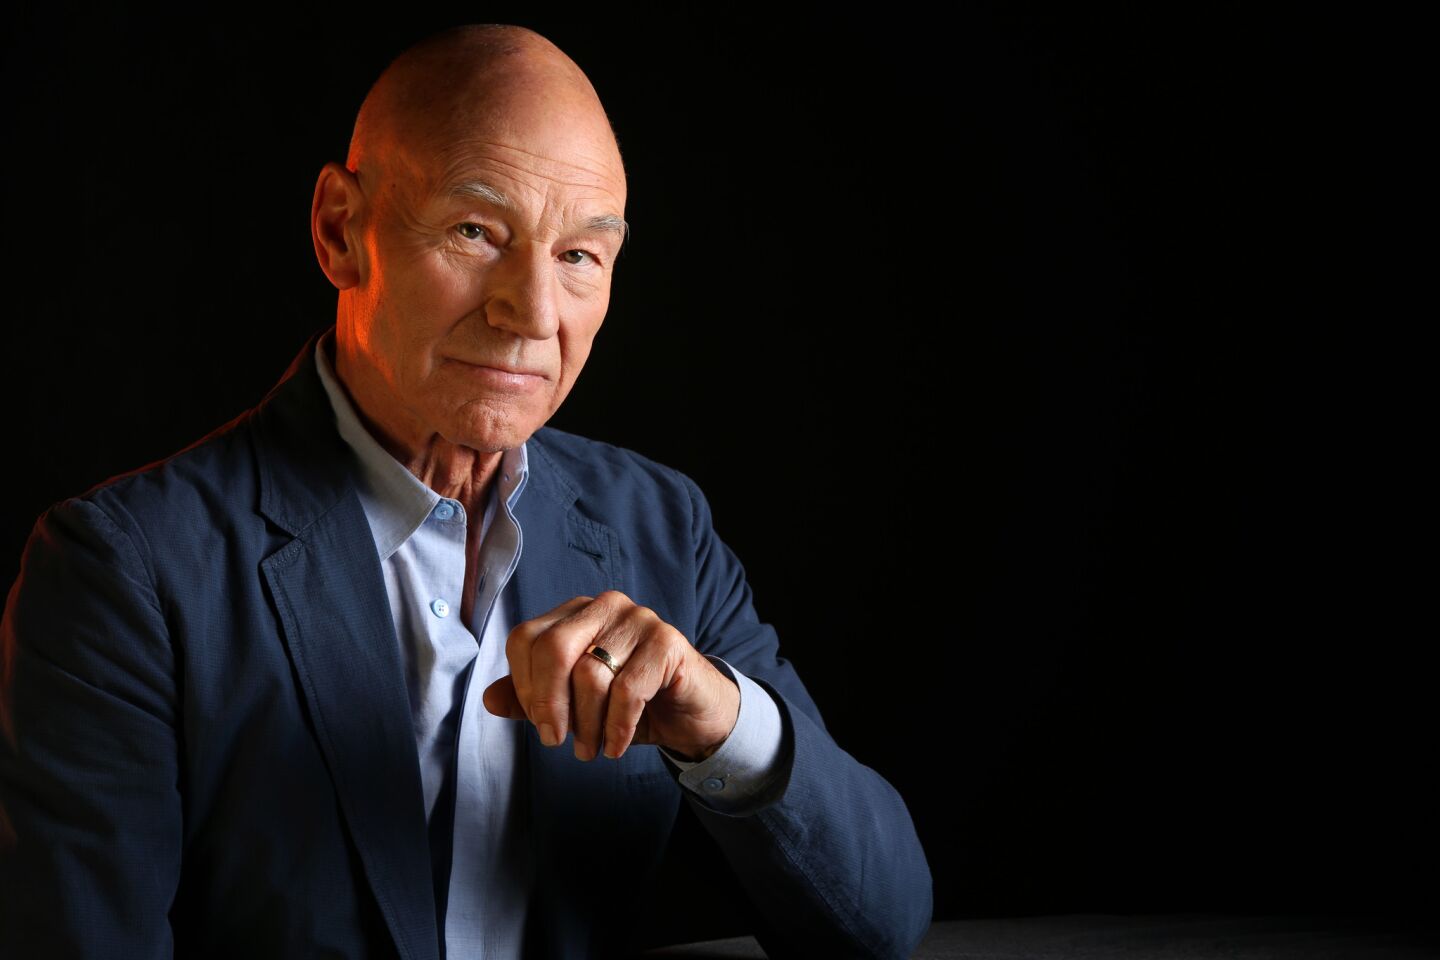 Celebrity portraits by The Times | Patrick Stewart